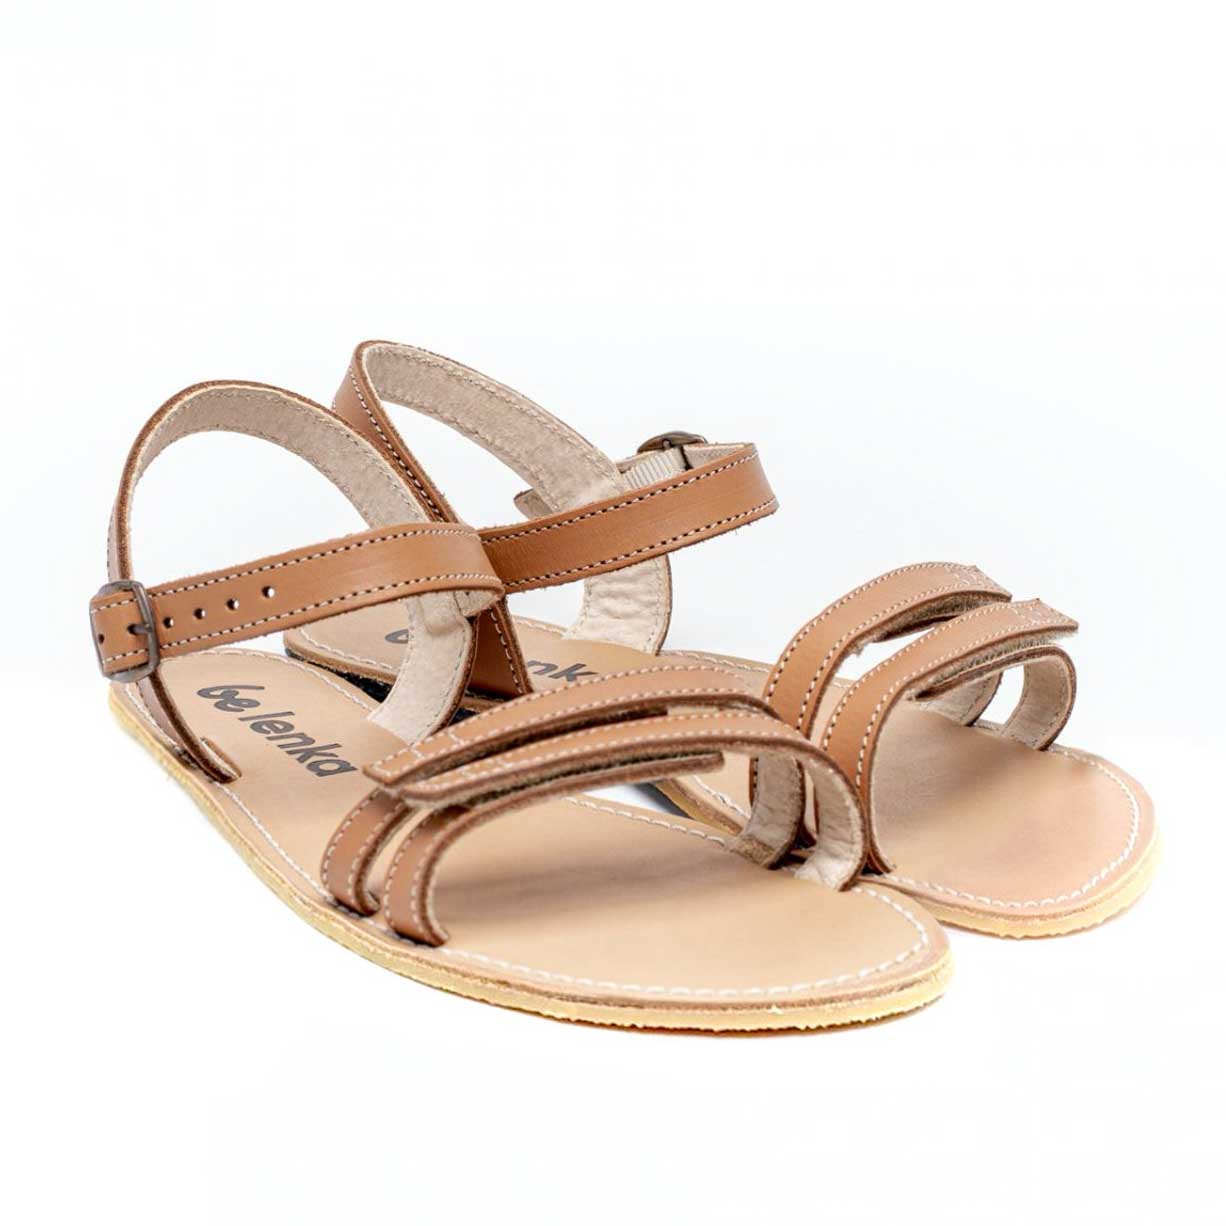 A photo of Brown Be Lenka Summer Sandals made with leather and tan rubber soles. The sandals are medium brown in color and have thin double straps on the front of the foot. They also have straps that go around the ankle and heel and have a small buckle. Both sandals are shown beside each other on the right side and angled slightly to the front against a white background. #color_brown